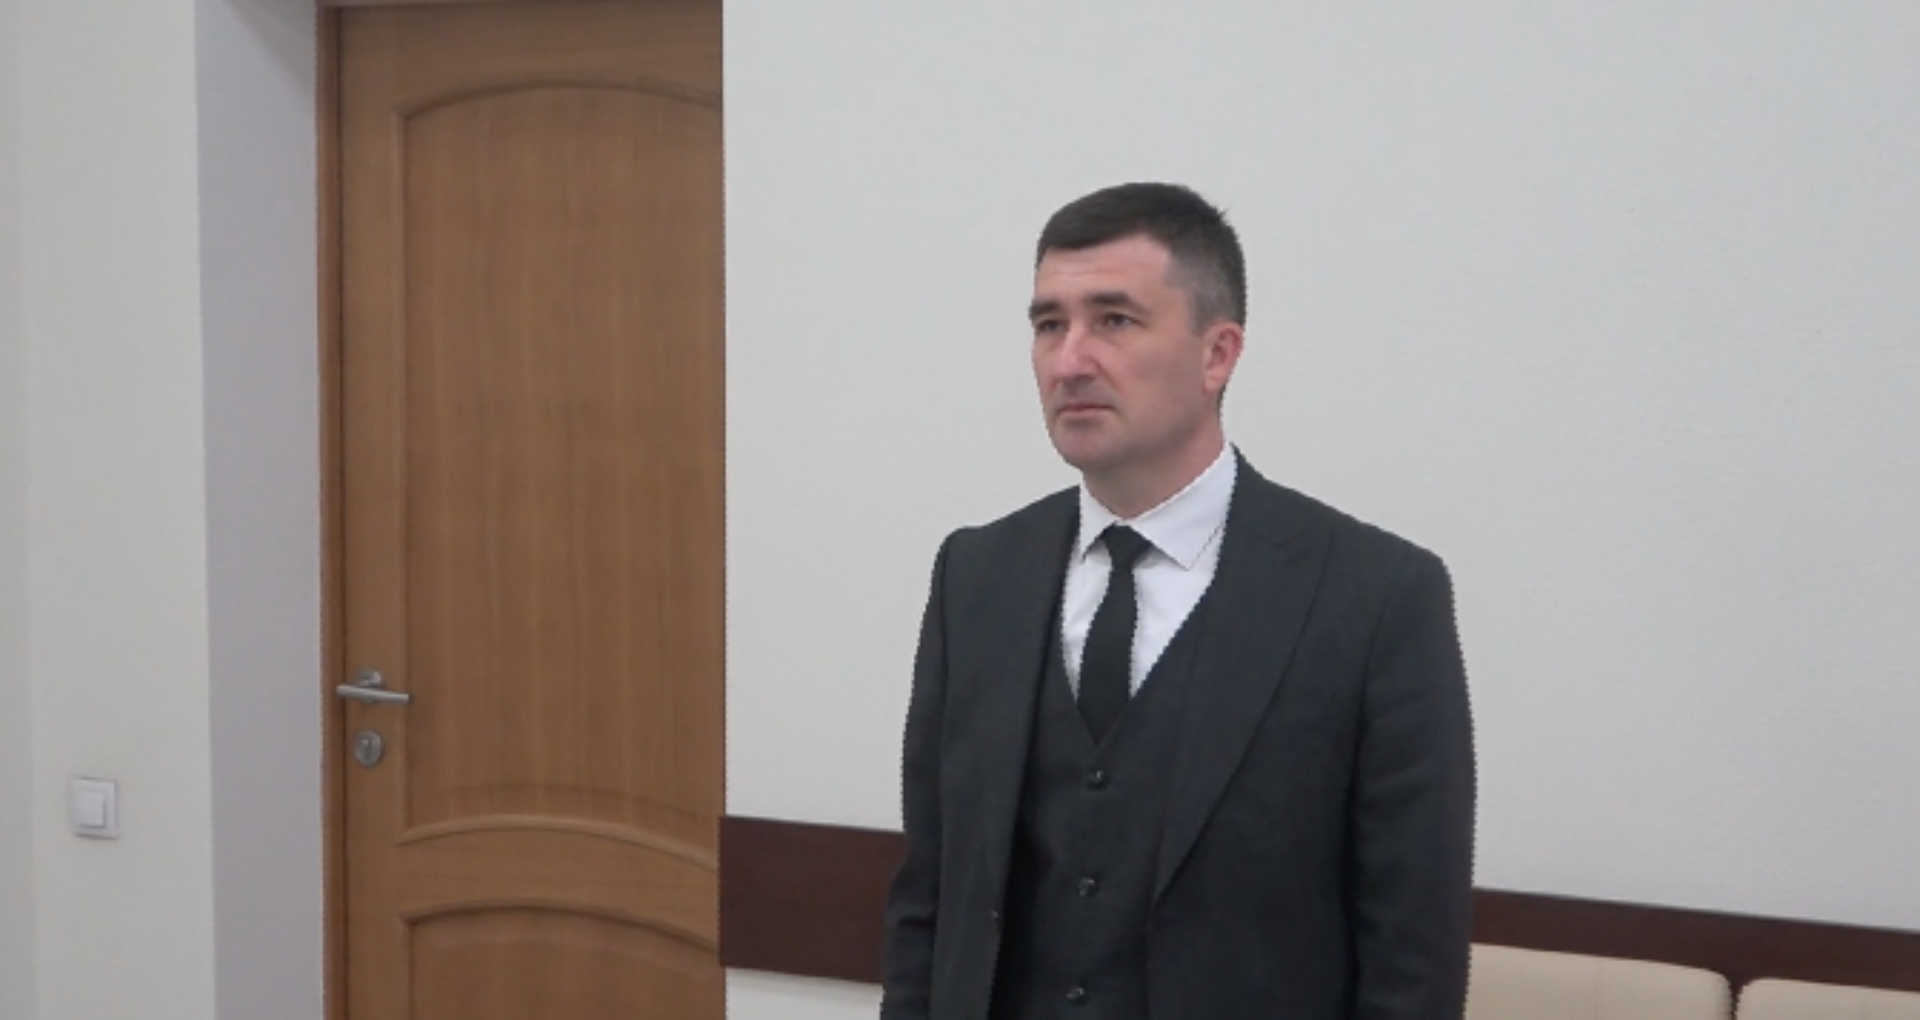 A criminal prosecution officer of the Ocnitsa Police Inspectorate sentenced to three years in prison for influence peddling: He demanded a bribe to settle a criminal case